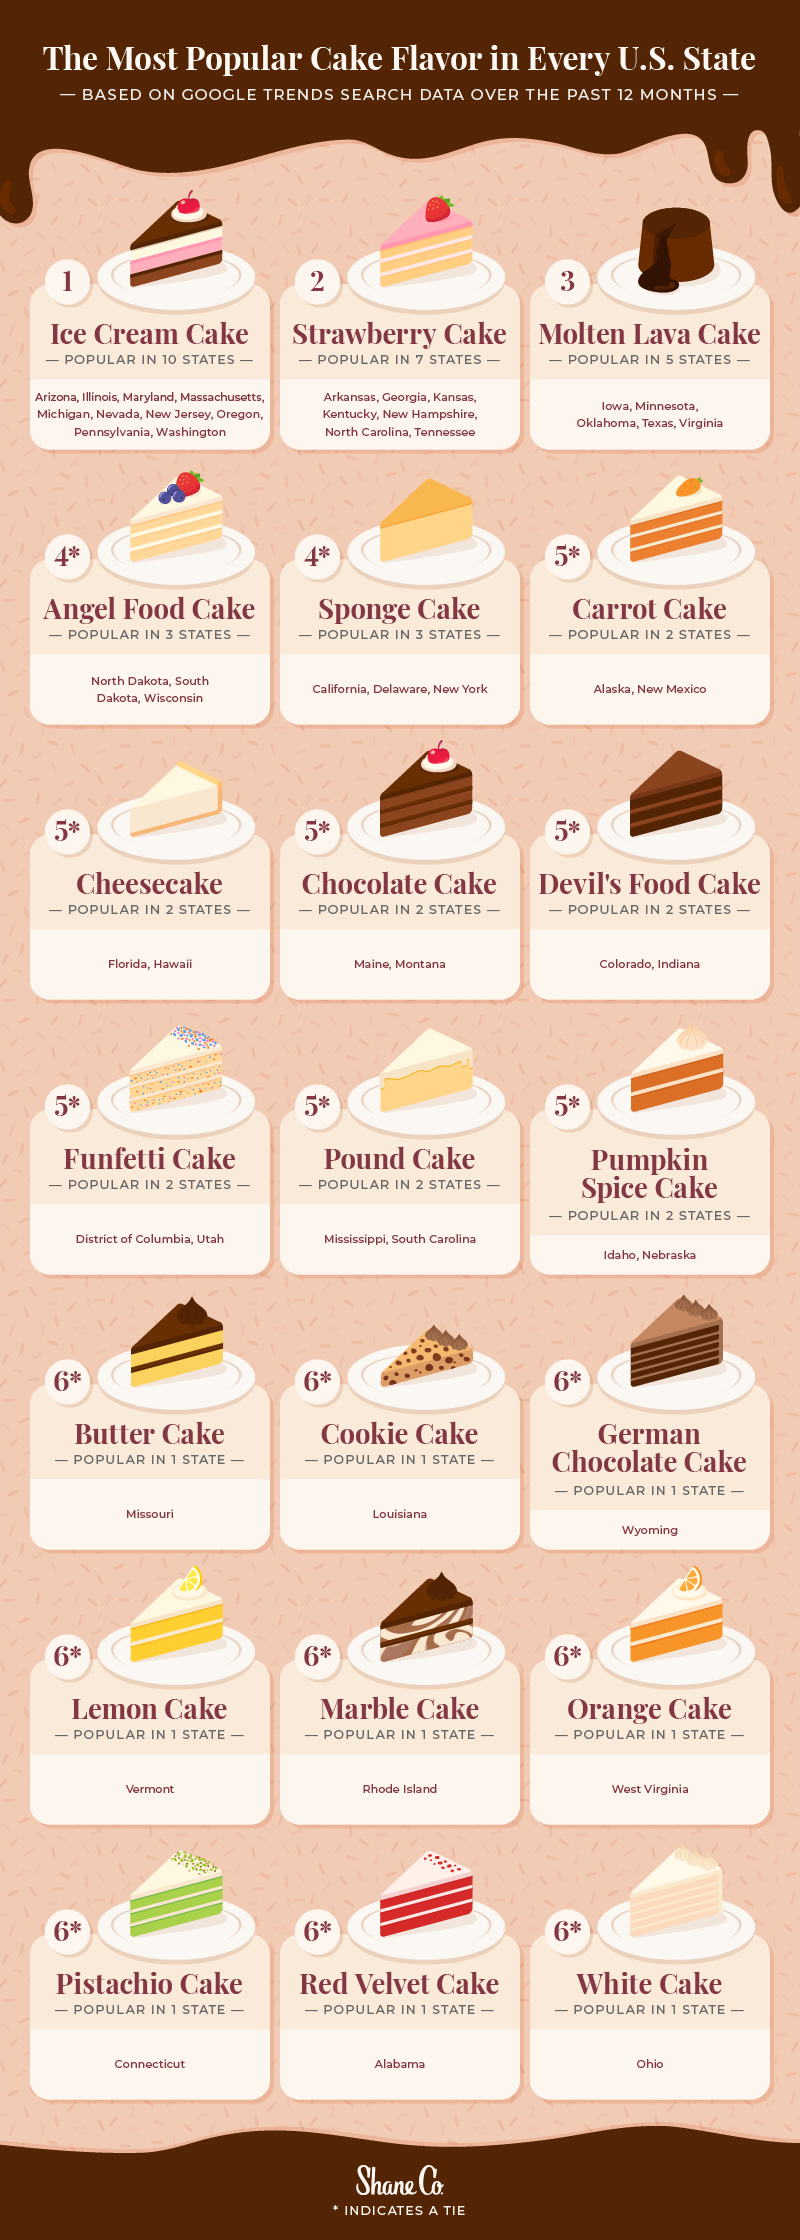 Infographic showing the most popular cake flavor in every U.S. state